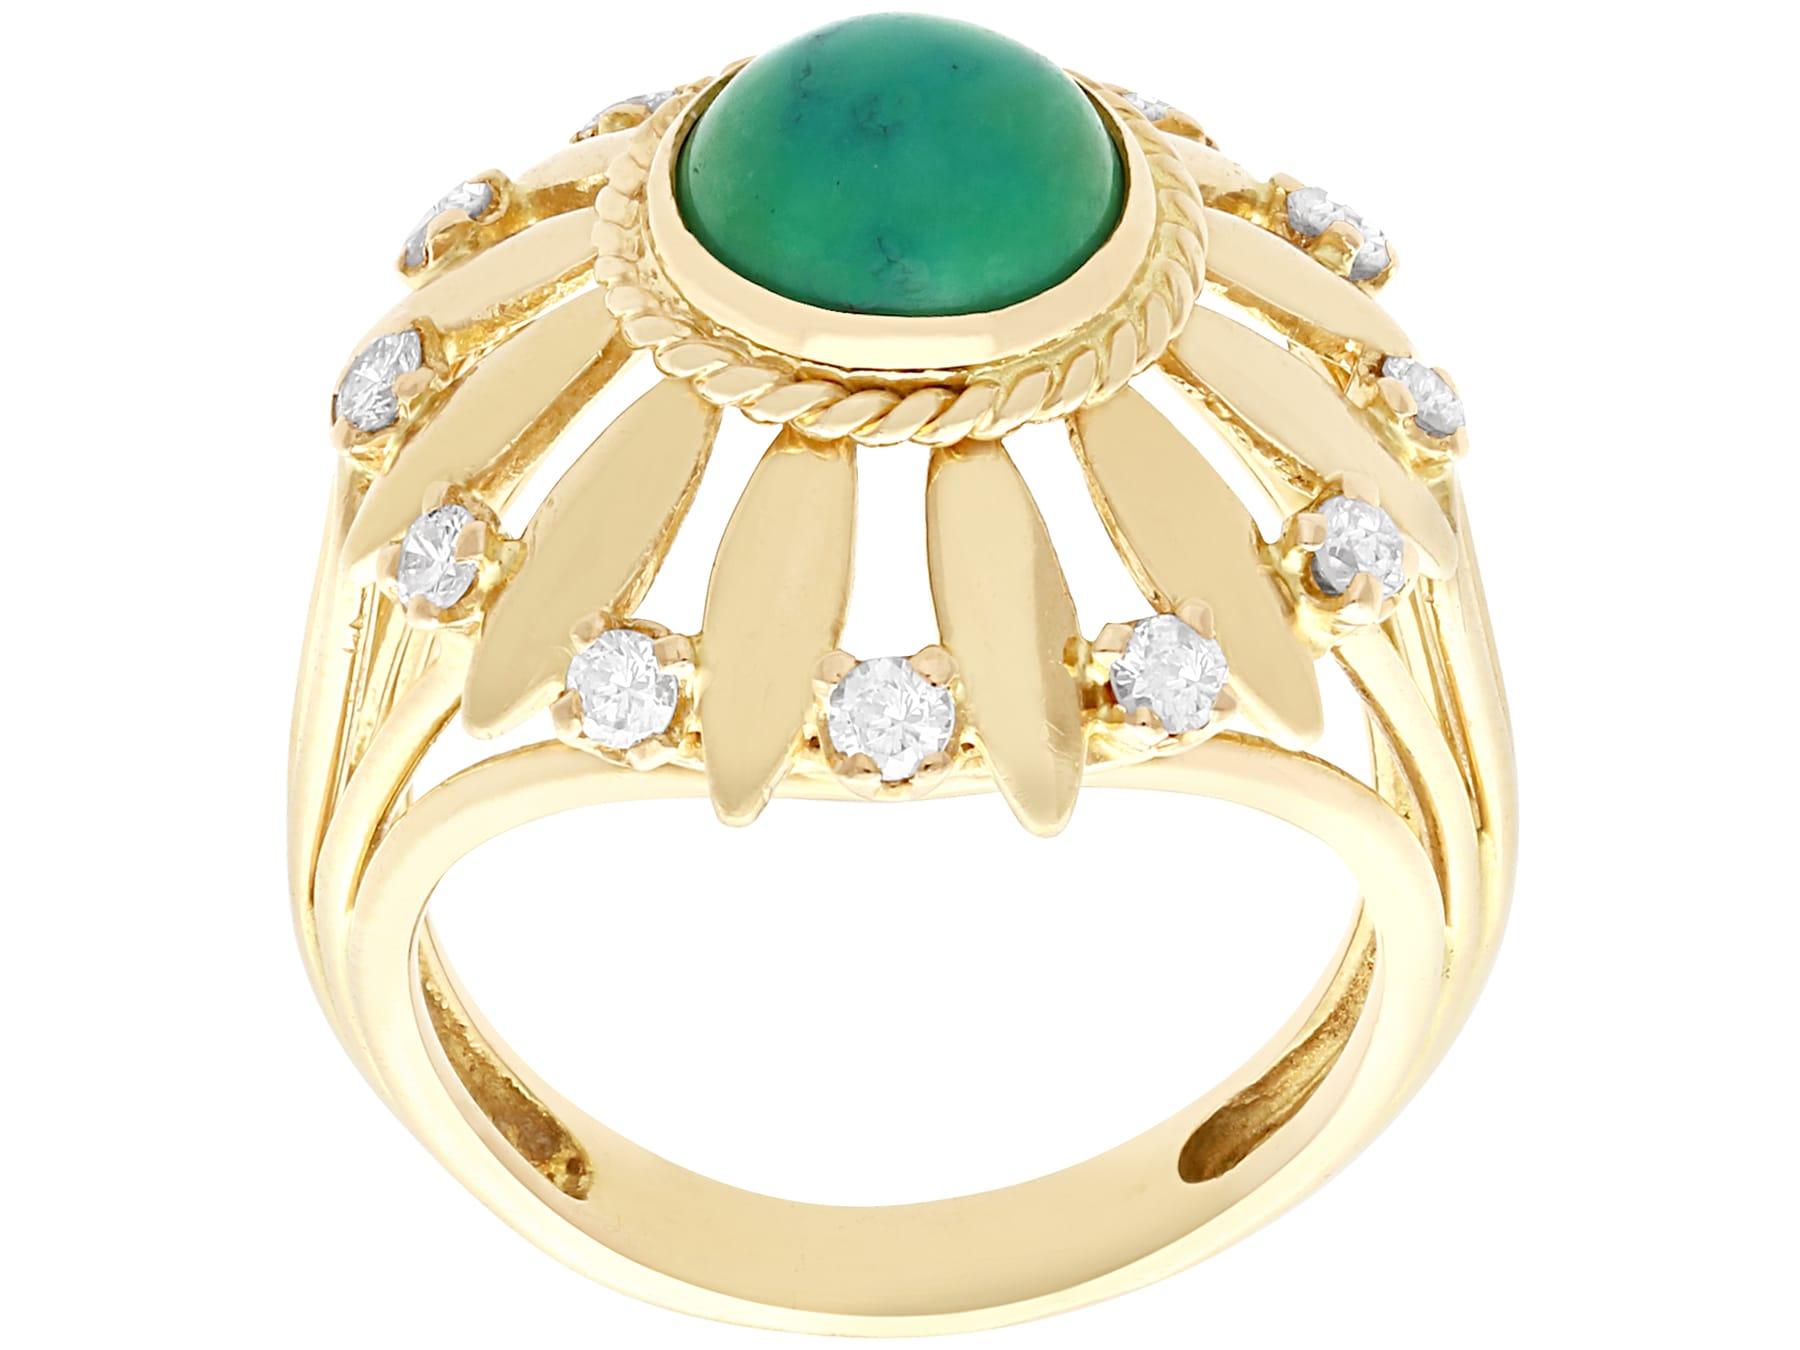 1950s Turquoise and Diamond Yellow Gold Cocktail Ring In Excellent Condition For Sale In Jesmond, Newcastle Upon Tyne